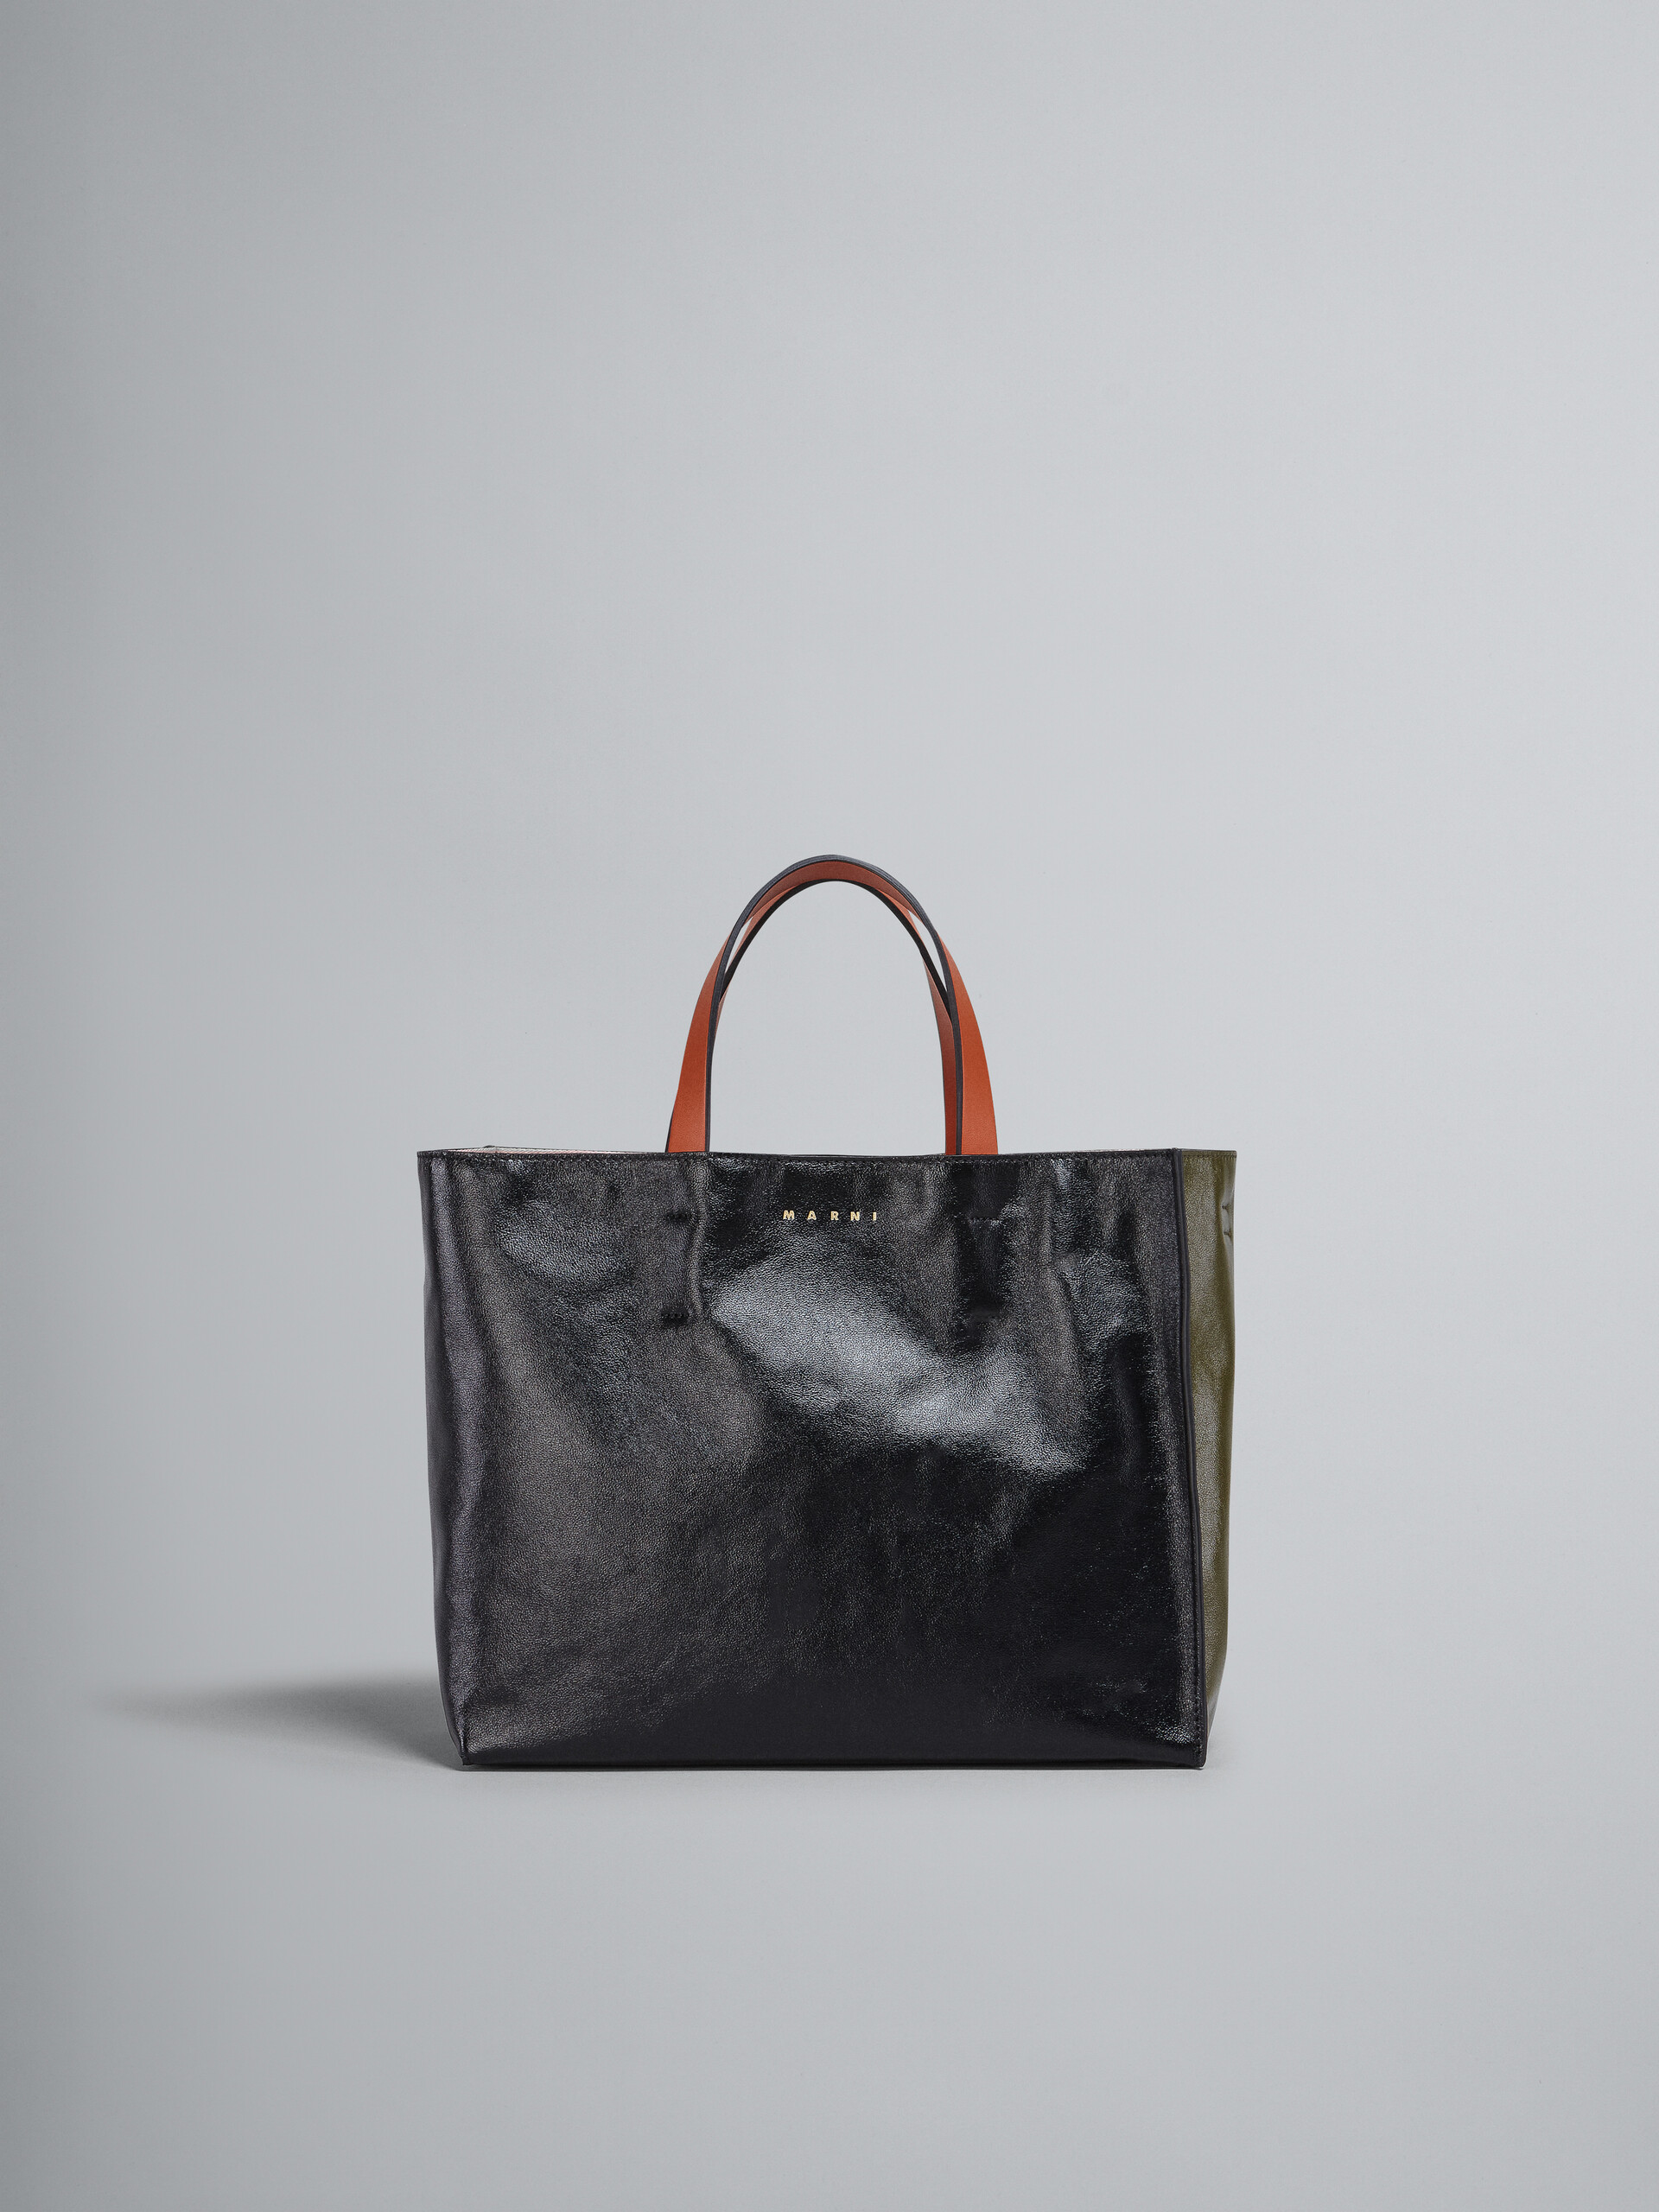 MUSEO SOFT small bag in black green and orange leather - Shopping Bags - Image 1